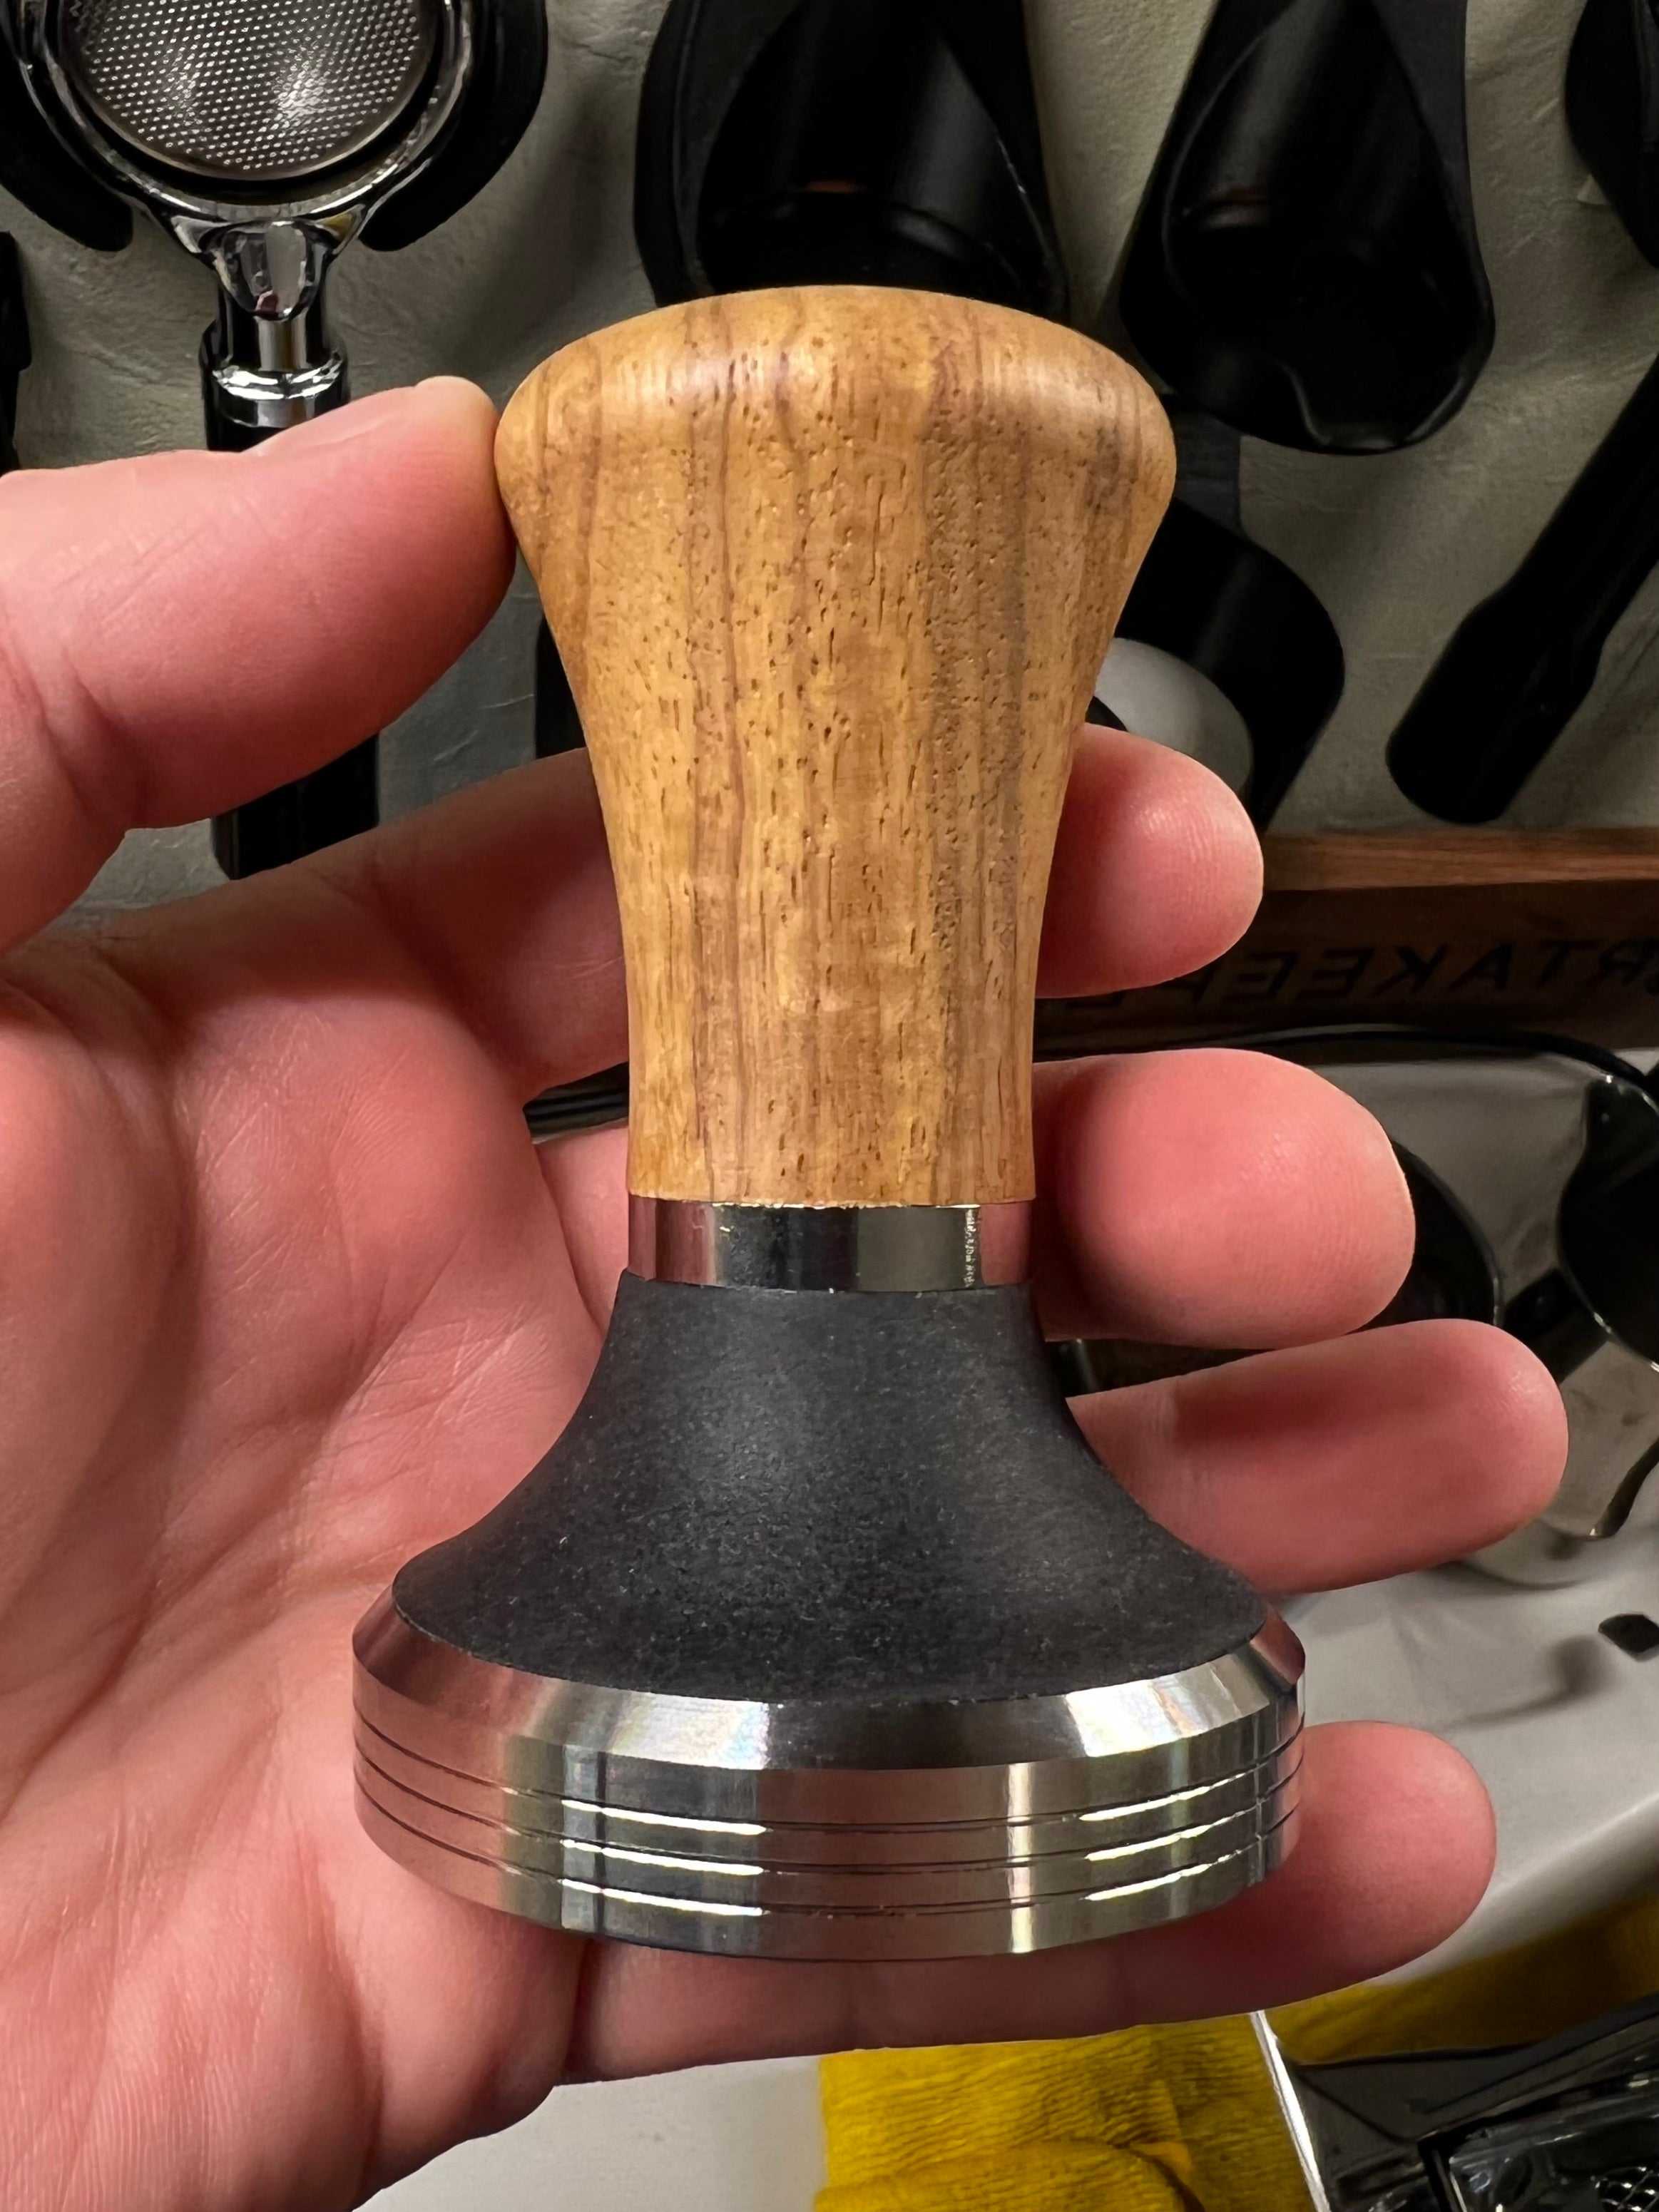  YOLOYO 58mm Espresso Tamper, Walnut Wooden Handle Coffee Tamper  for Espresso Machine 58mm, 30lb Consistant Pressure Calibrated Spring  Loaded Tamper with Premium Stainless Steel Base & Tamper Mat: Home & Kitchen